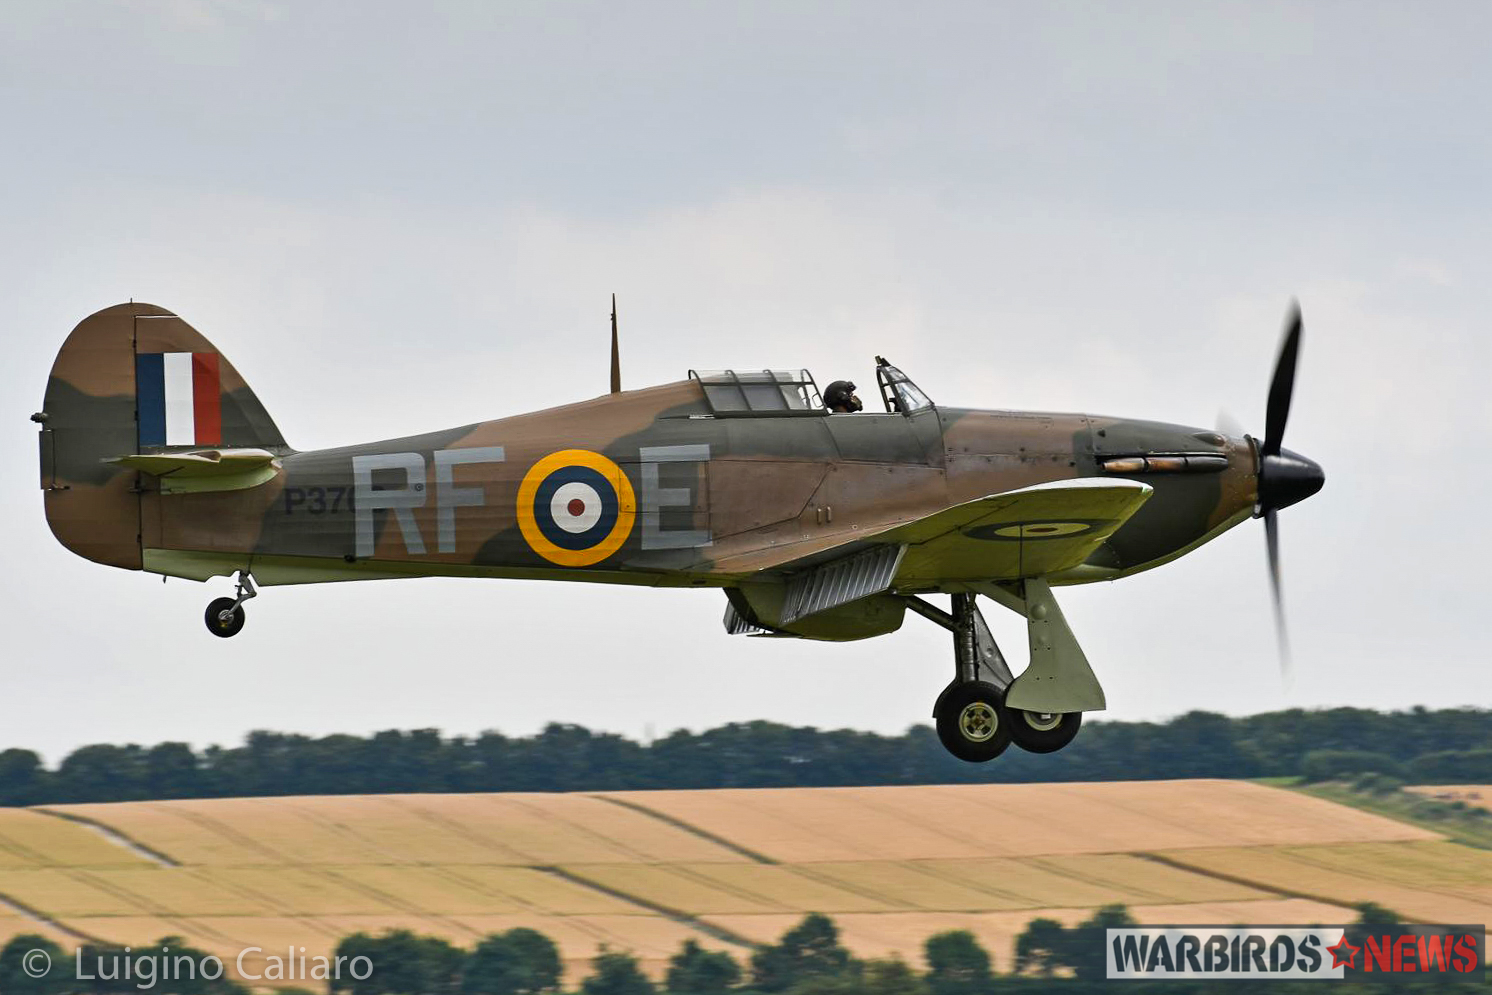 The Historic Aircraft Collection's Hawker Hurricane XII P3700, marked as a Battle of Britain era Mk.I of 303 (Polish) Squadron, comes in for a landing. (photo by Luigino Caliaro)